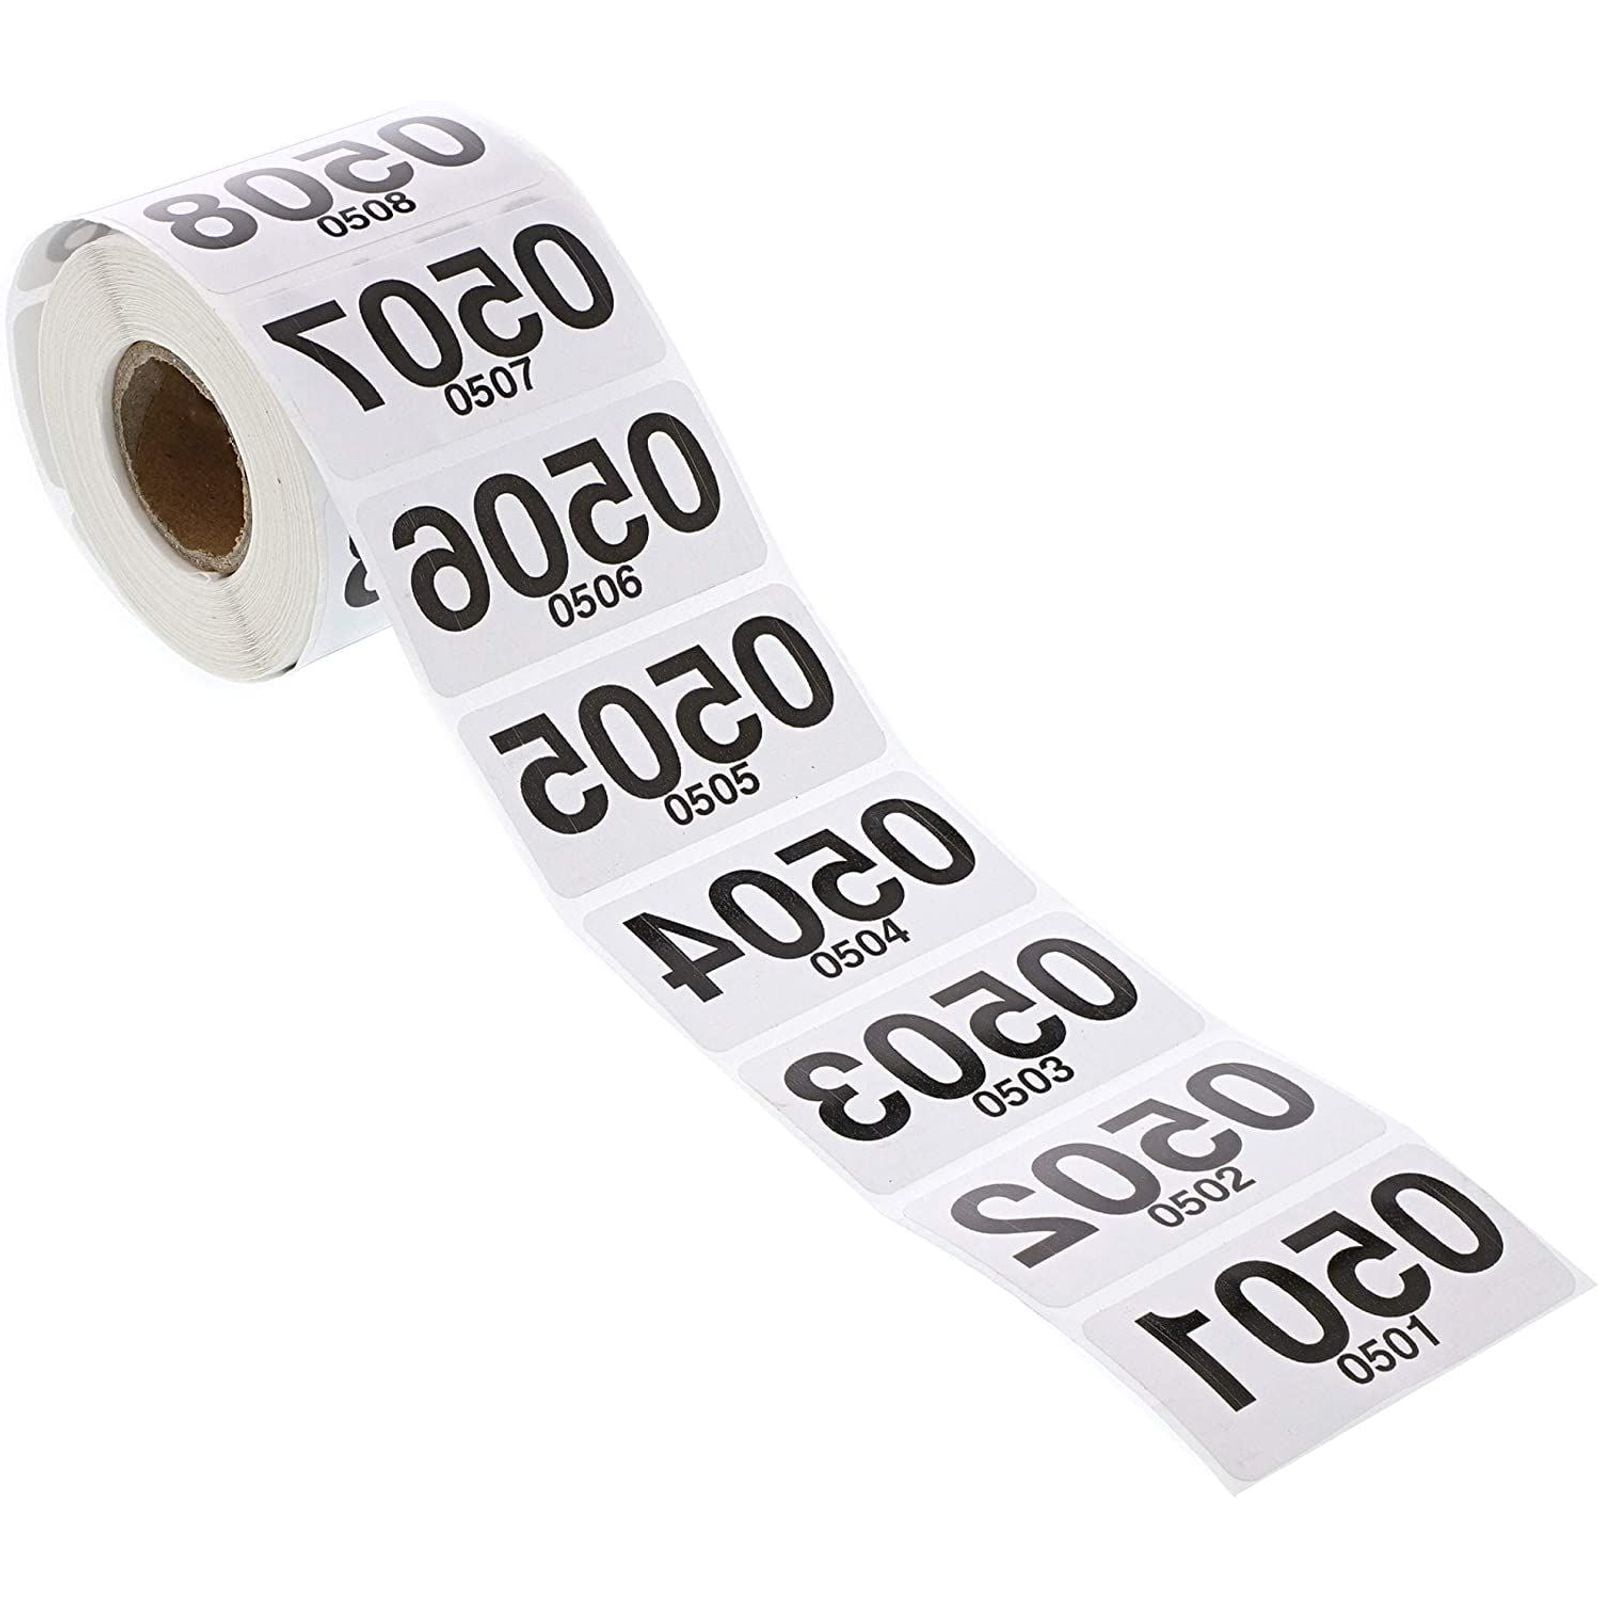 500x £4 RED PRICE SELF ADHESIVE STICKERS STICKY LABELS TAG LABELS FOR RETAIL 